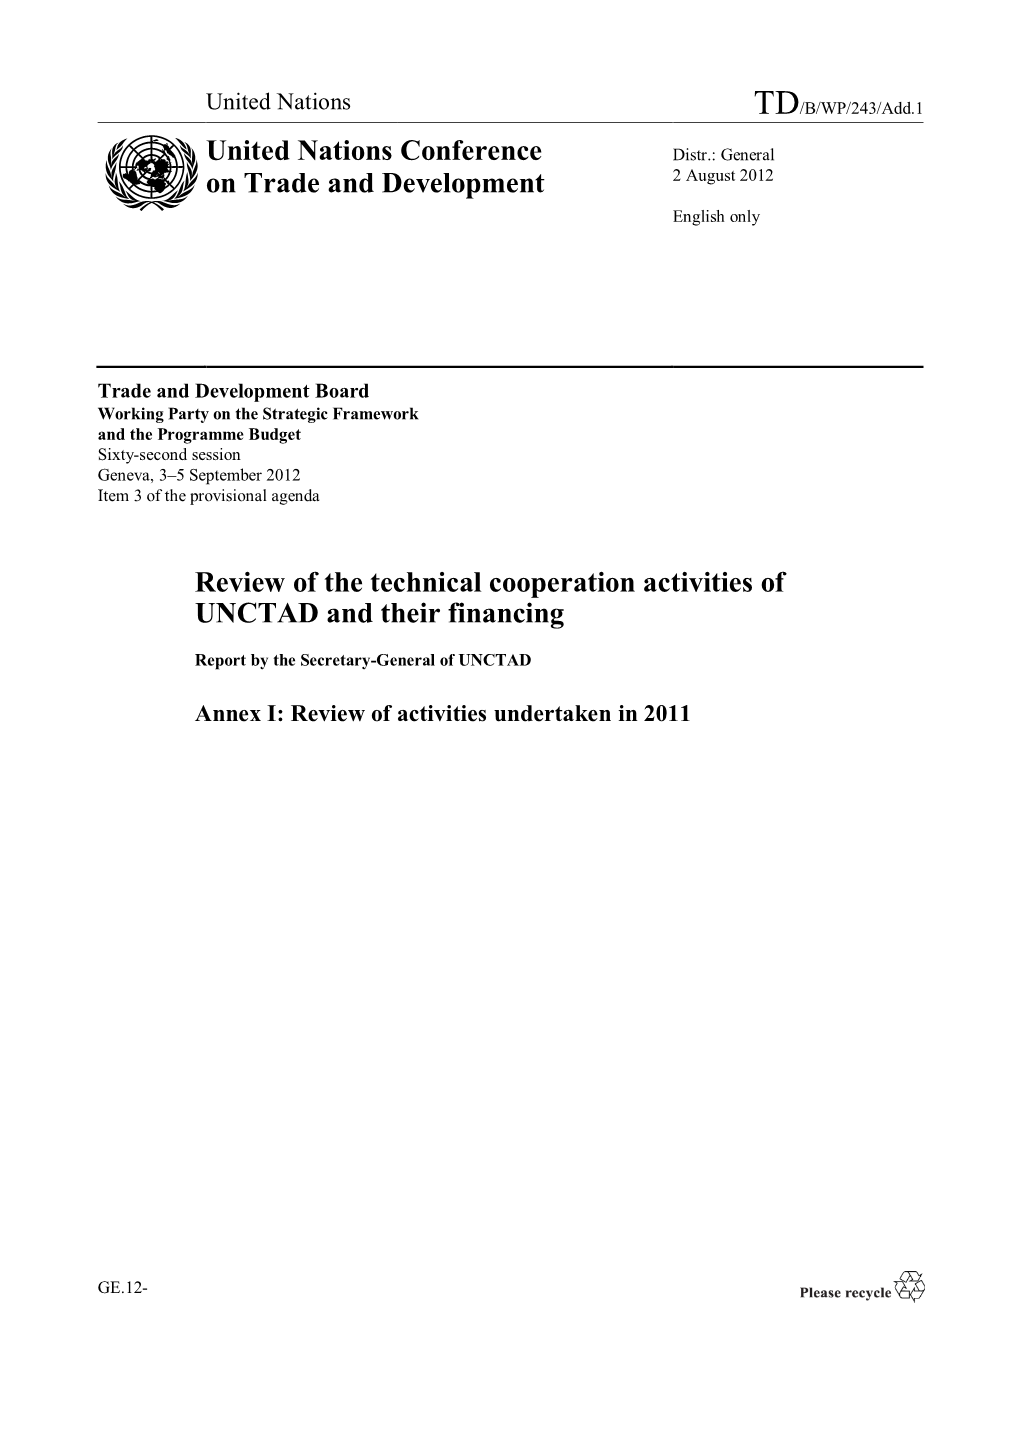 Review of the Technical Cooperation Activities of UNCTAD and Their Financing